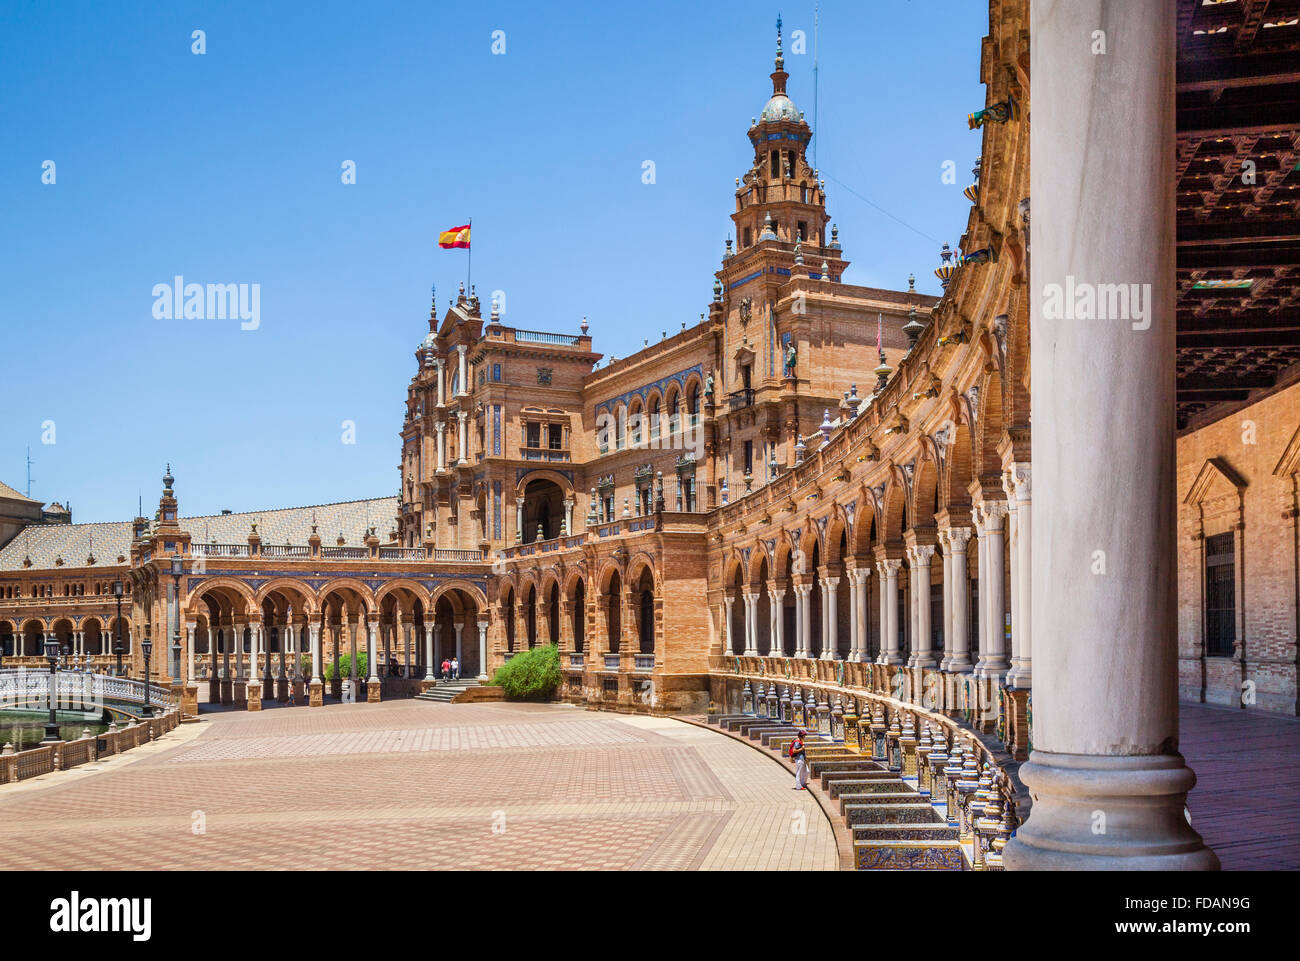 Spain, Andalusia, Province of Seville, Seville, Plaza de Espana, central building of the Ibero-America Exposition of 1929 Stock Photo